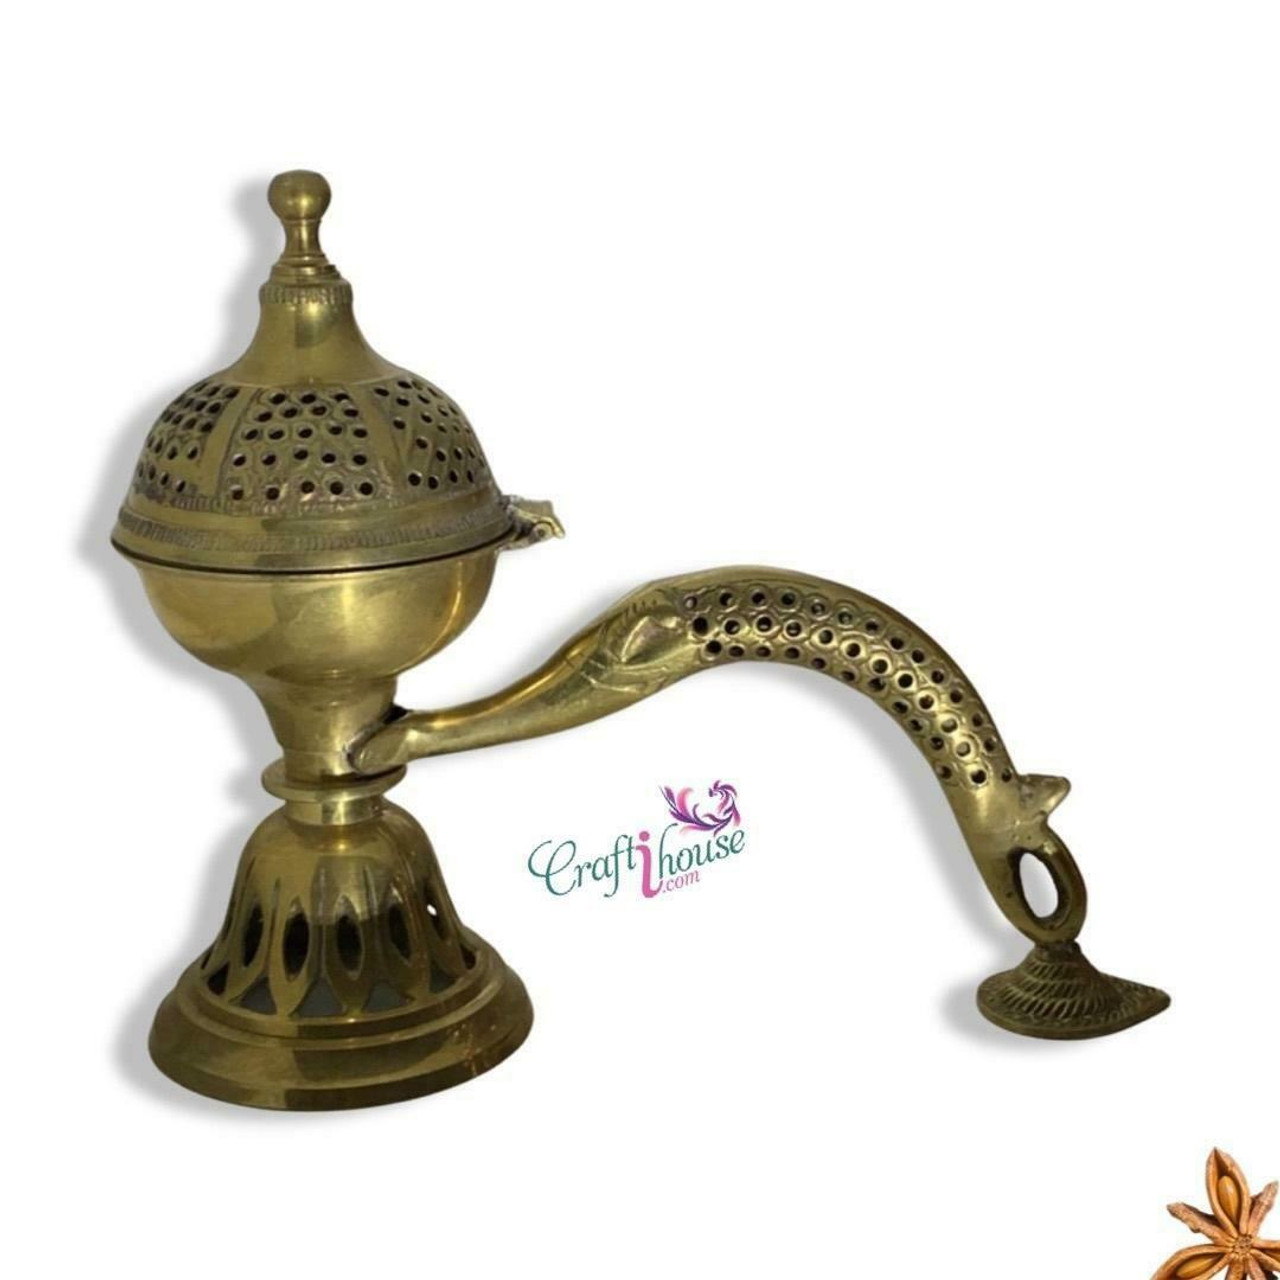 Vintage Oil Burning Engraved Brass Genie Lamp, Made in India